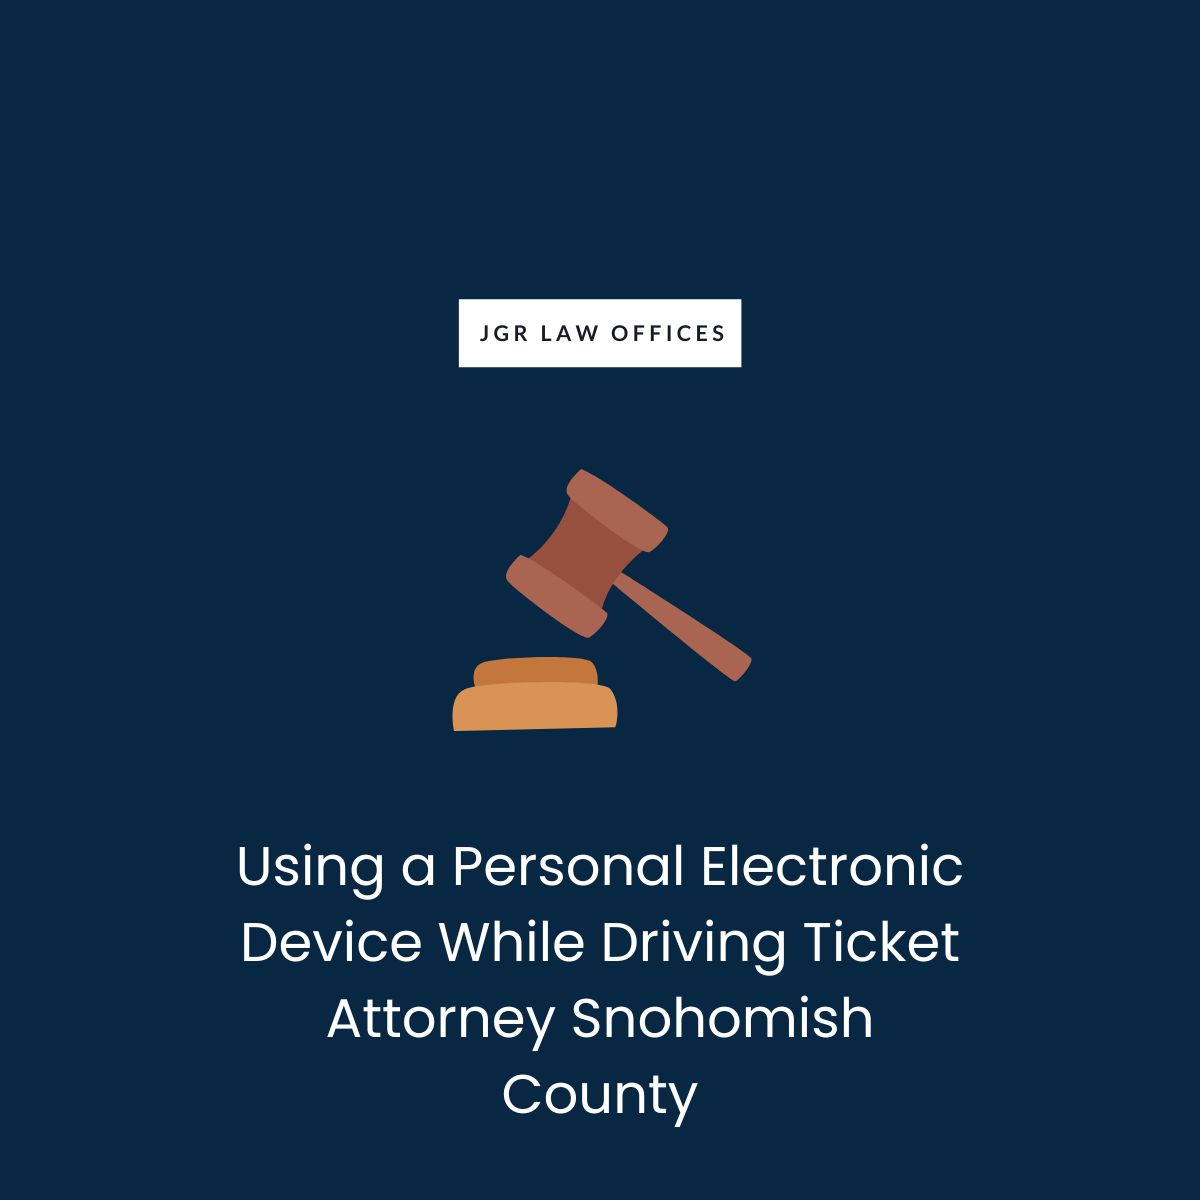 Using a Personal Electronic Device While Driving Ticket Attorney Snohomish County